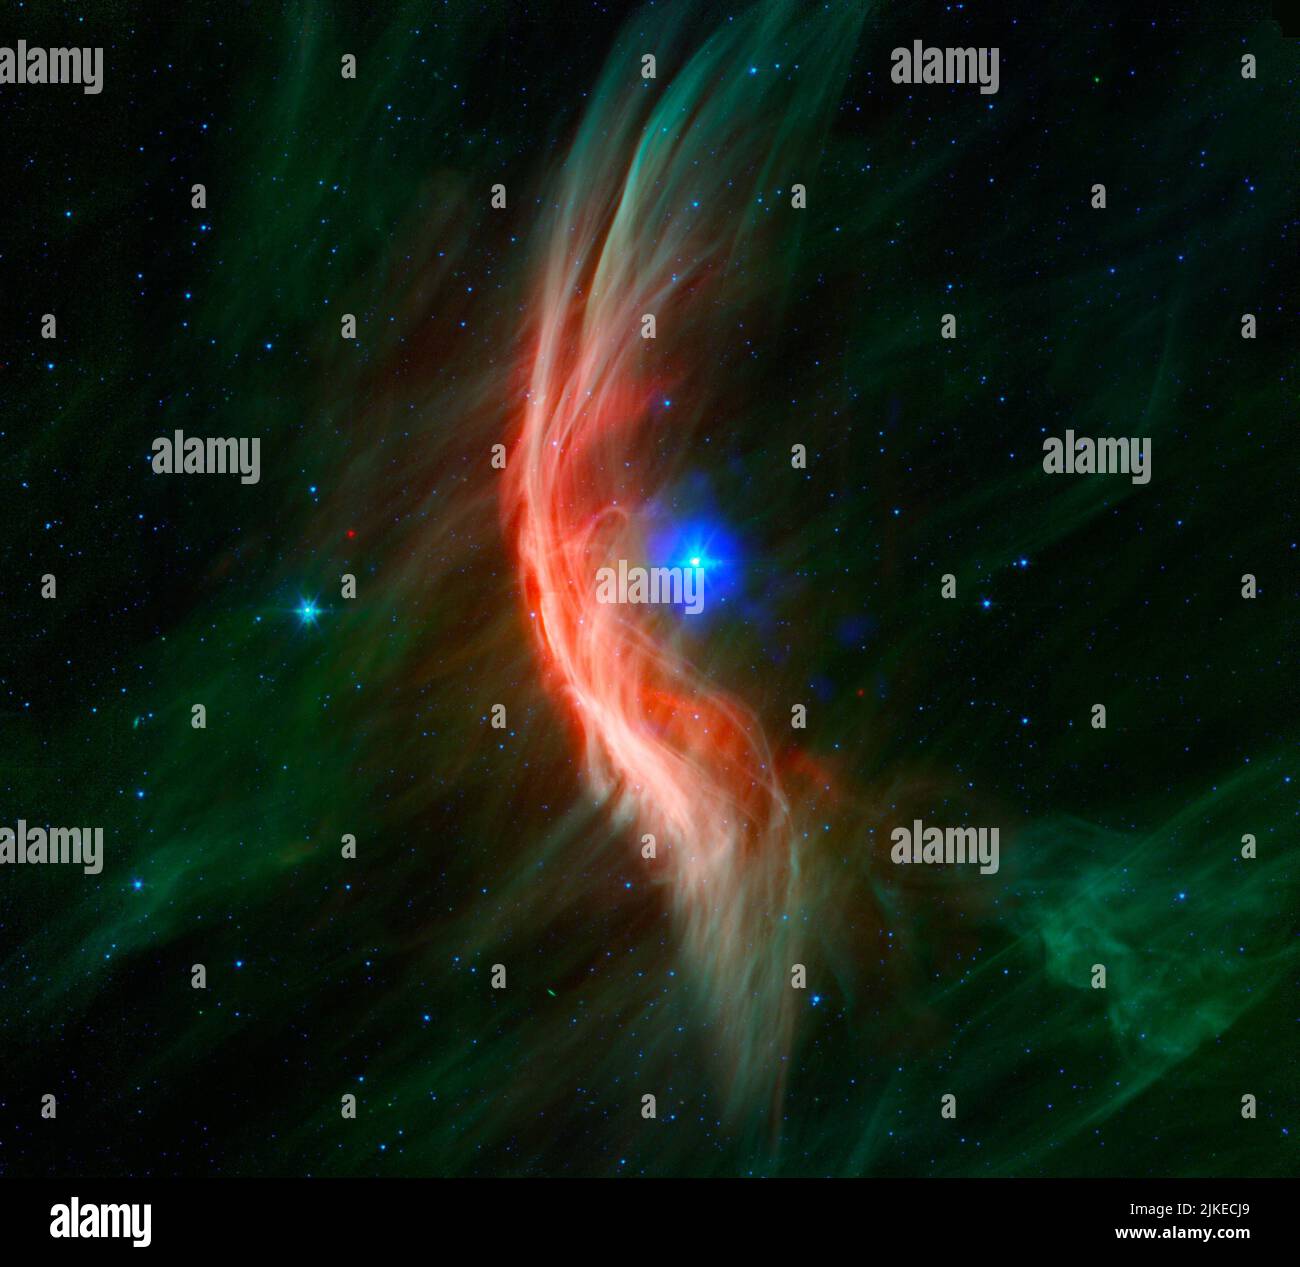 July 29, 2022 - Space - The giant star Zeta Ophiuchi is having a 'shocking' effect on the surrounding dust clouds in this infrared image from NASA's Spitzer Space Telescope. Stellar winds flowing out from this fast-moving star are making ripples in the dust as it approaches, creating a bow shock seen as glowing gossamer threads, which, for this star, are only seen in infrared light. Zeta Ophiuchi is a young, large and hot star located around 370 light-years away. It dwarfs our own sun in many ways, it is about six times hotter, eight times wider, 20 times more massive, and about 80,000 times a Stock Photo